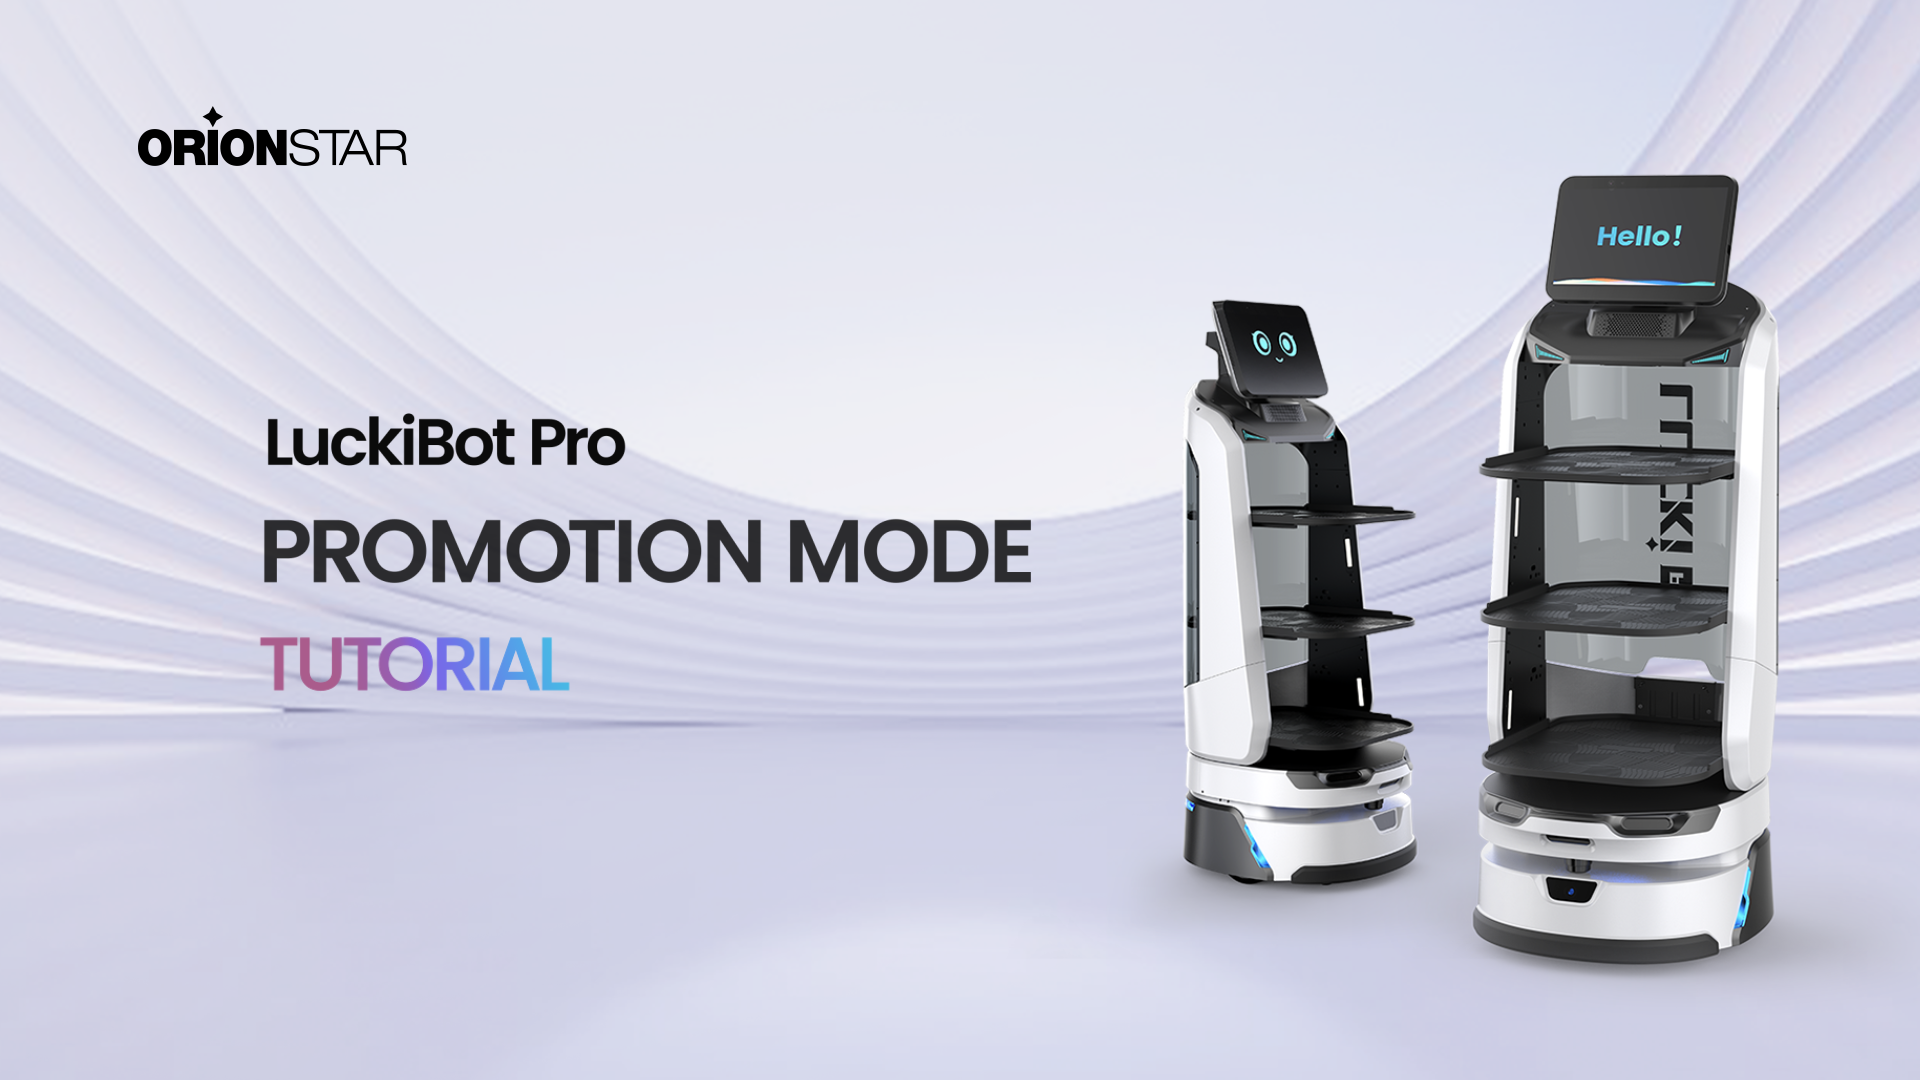 Explore the Promotion Mode Tutorial for LuckiBot Pro.